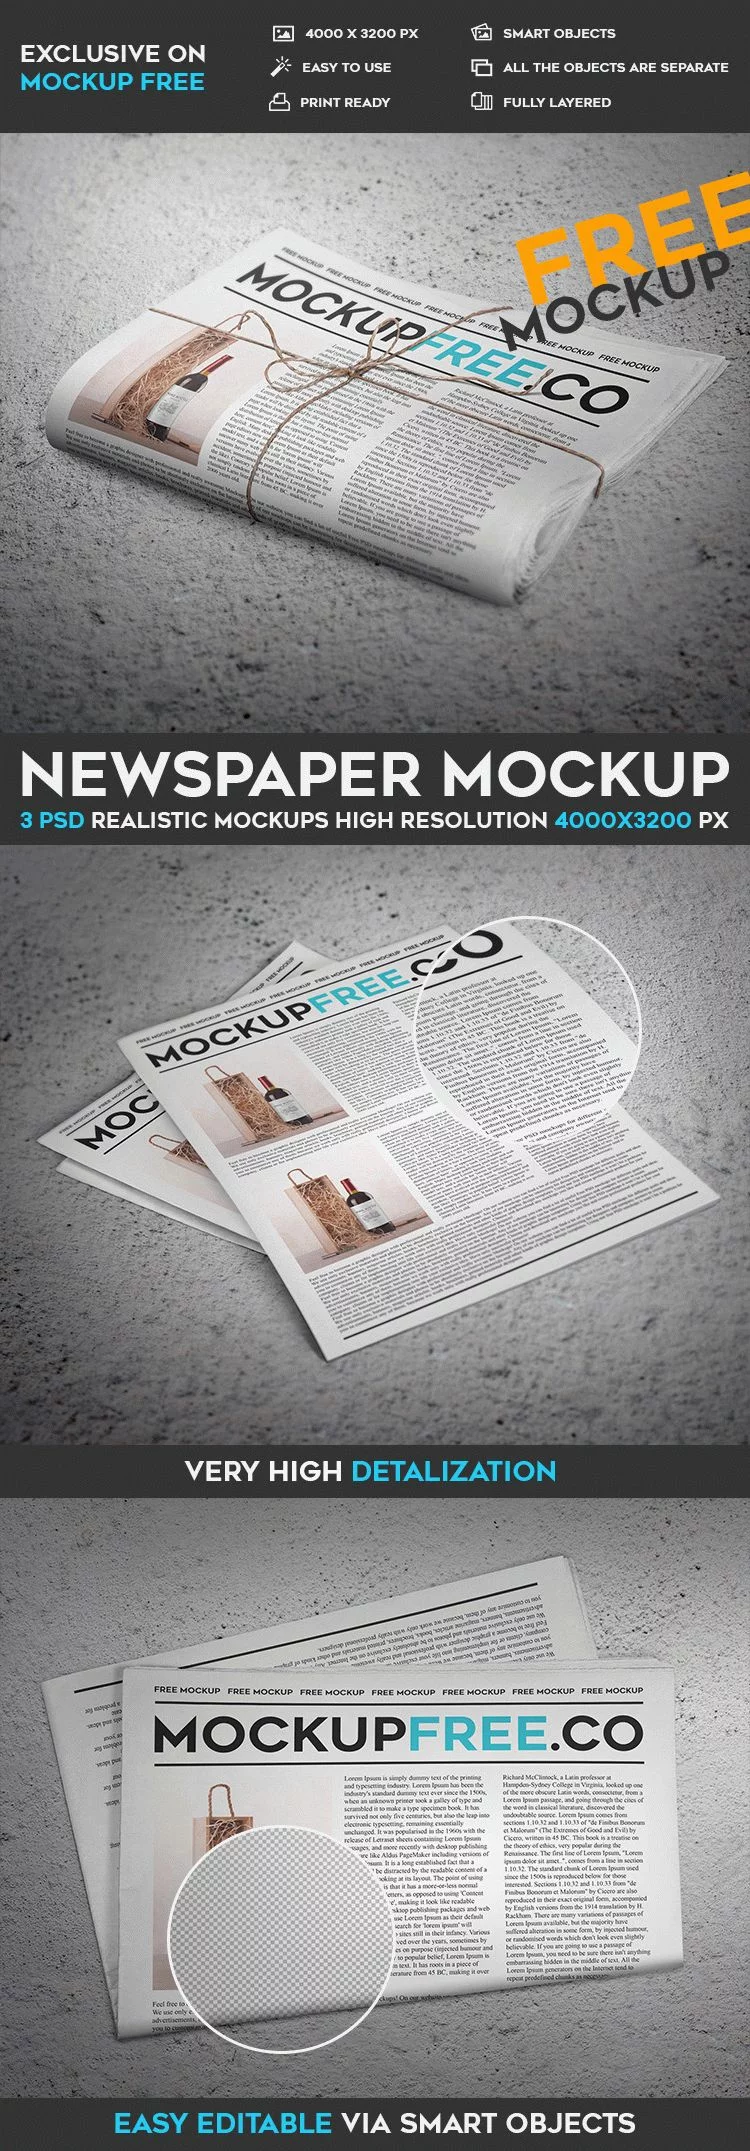 bigpreview_newspaper-mockup-template-free-in-psd